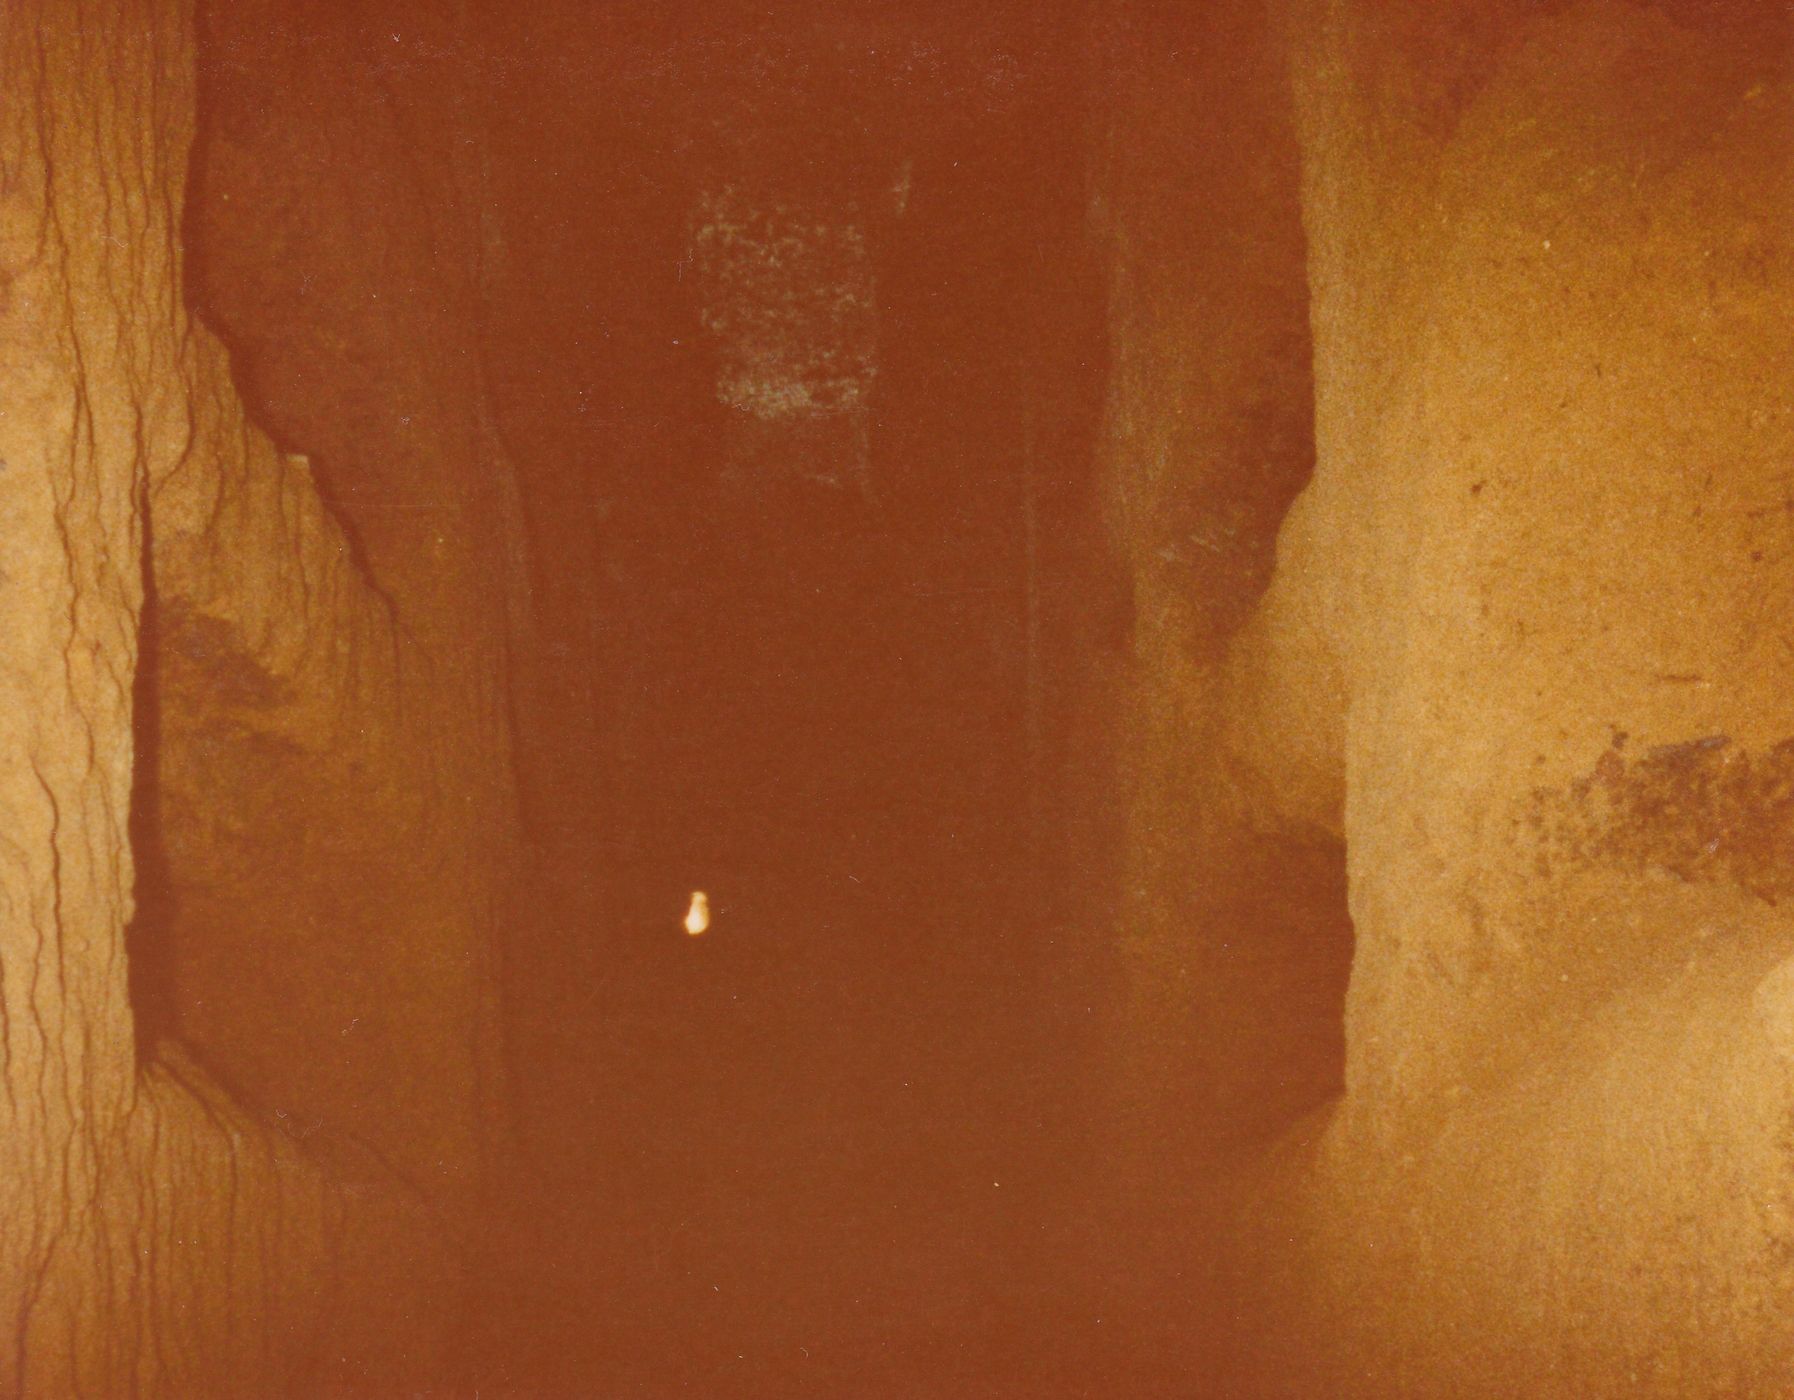 A washed-out photograph of a narrow hewn-stone hallway with long niches carved into the walls. There is a light source in the distance, but surrounded by darkness.